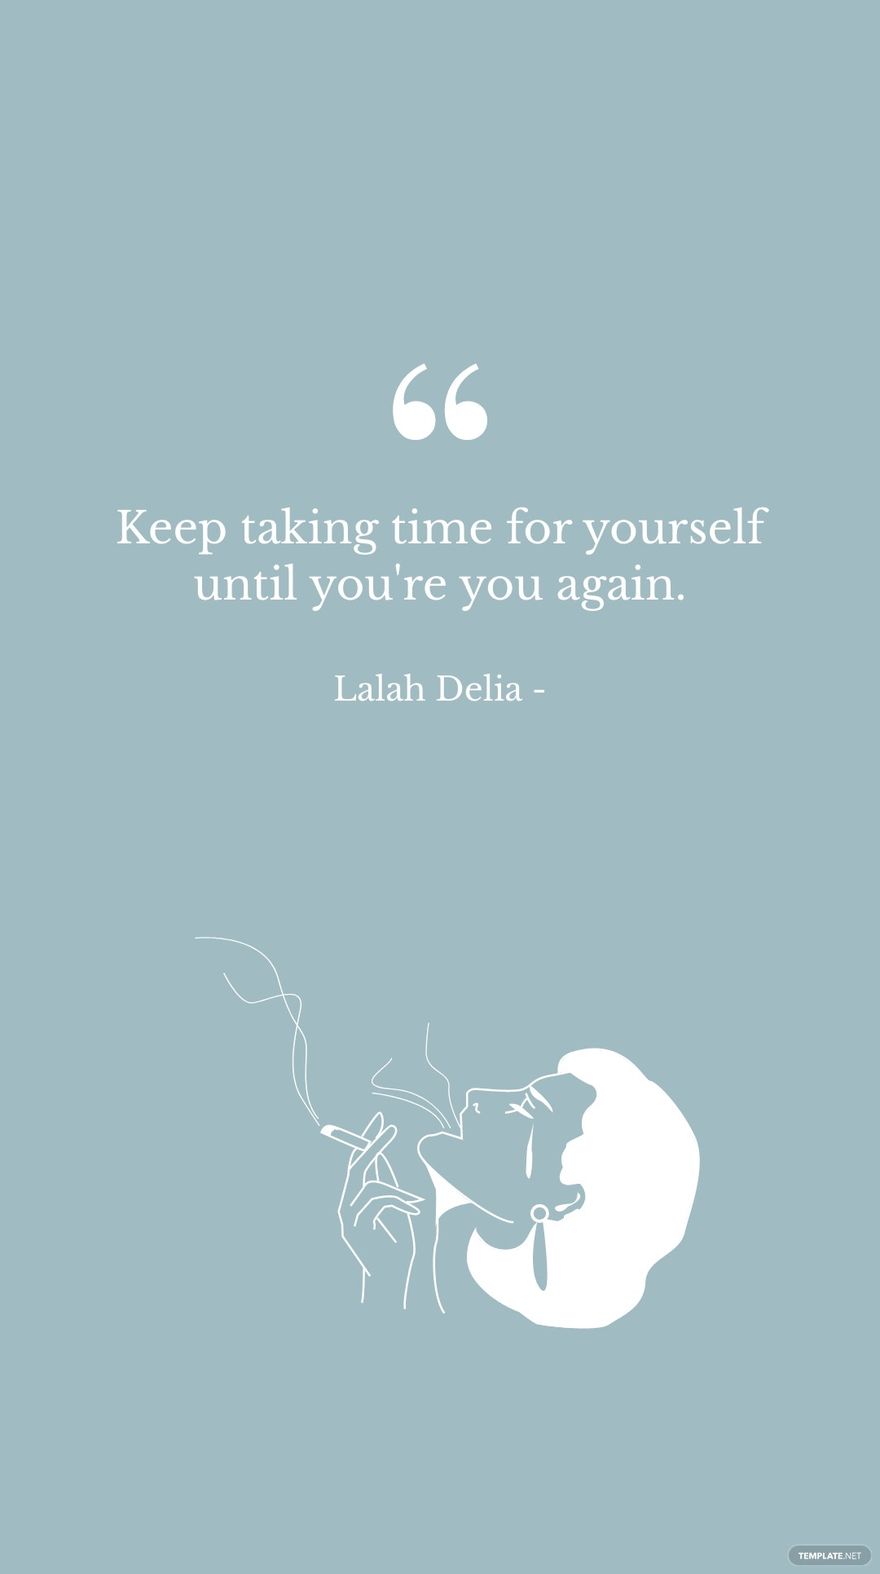 Free Lalah Delia - Keep taking time for yourself until you're you again. in JPG